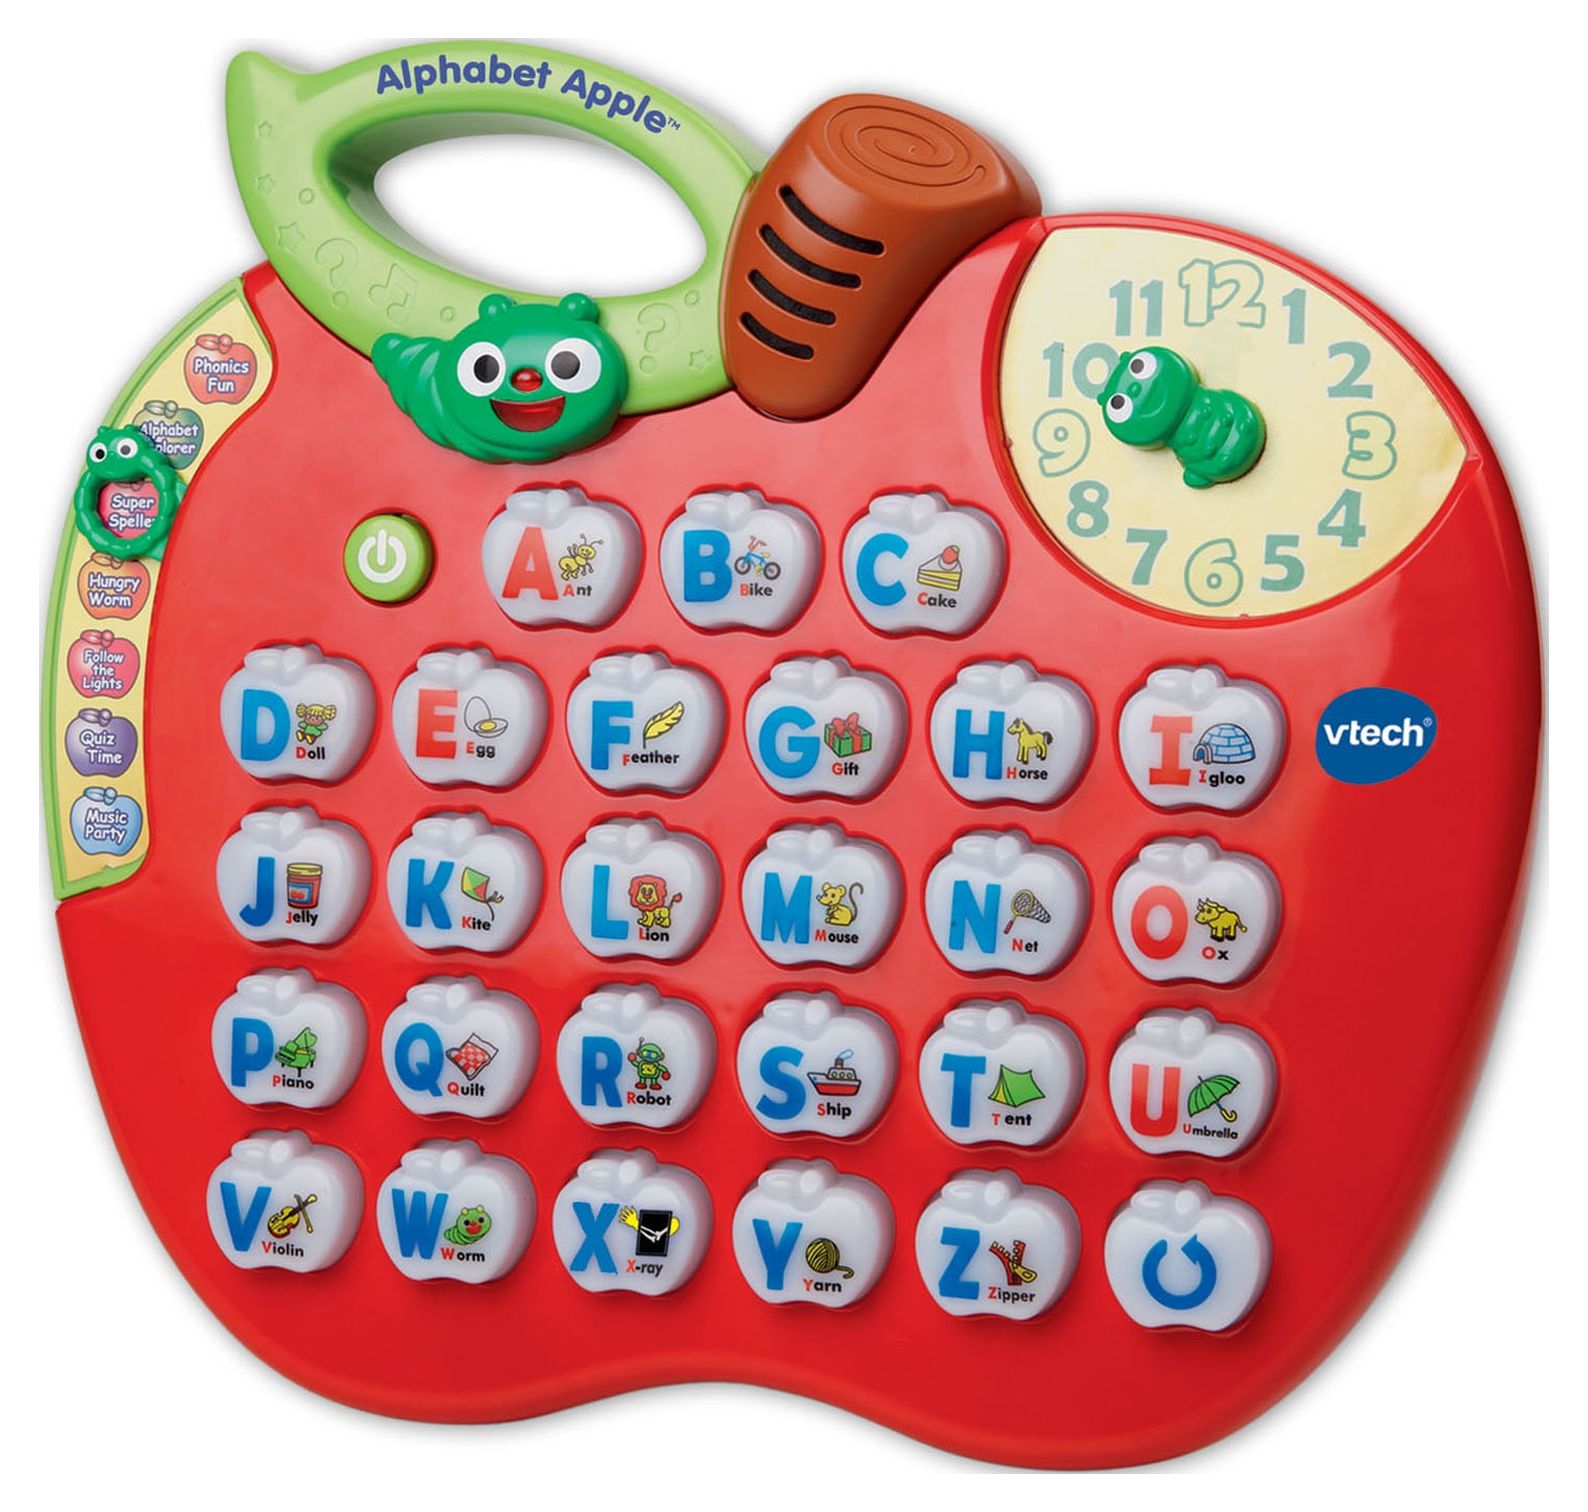 VTech, Alphabet Apple, ABC Learning Toy, Preschool Toy - image 4 of 5